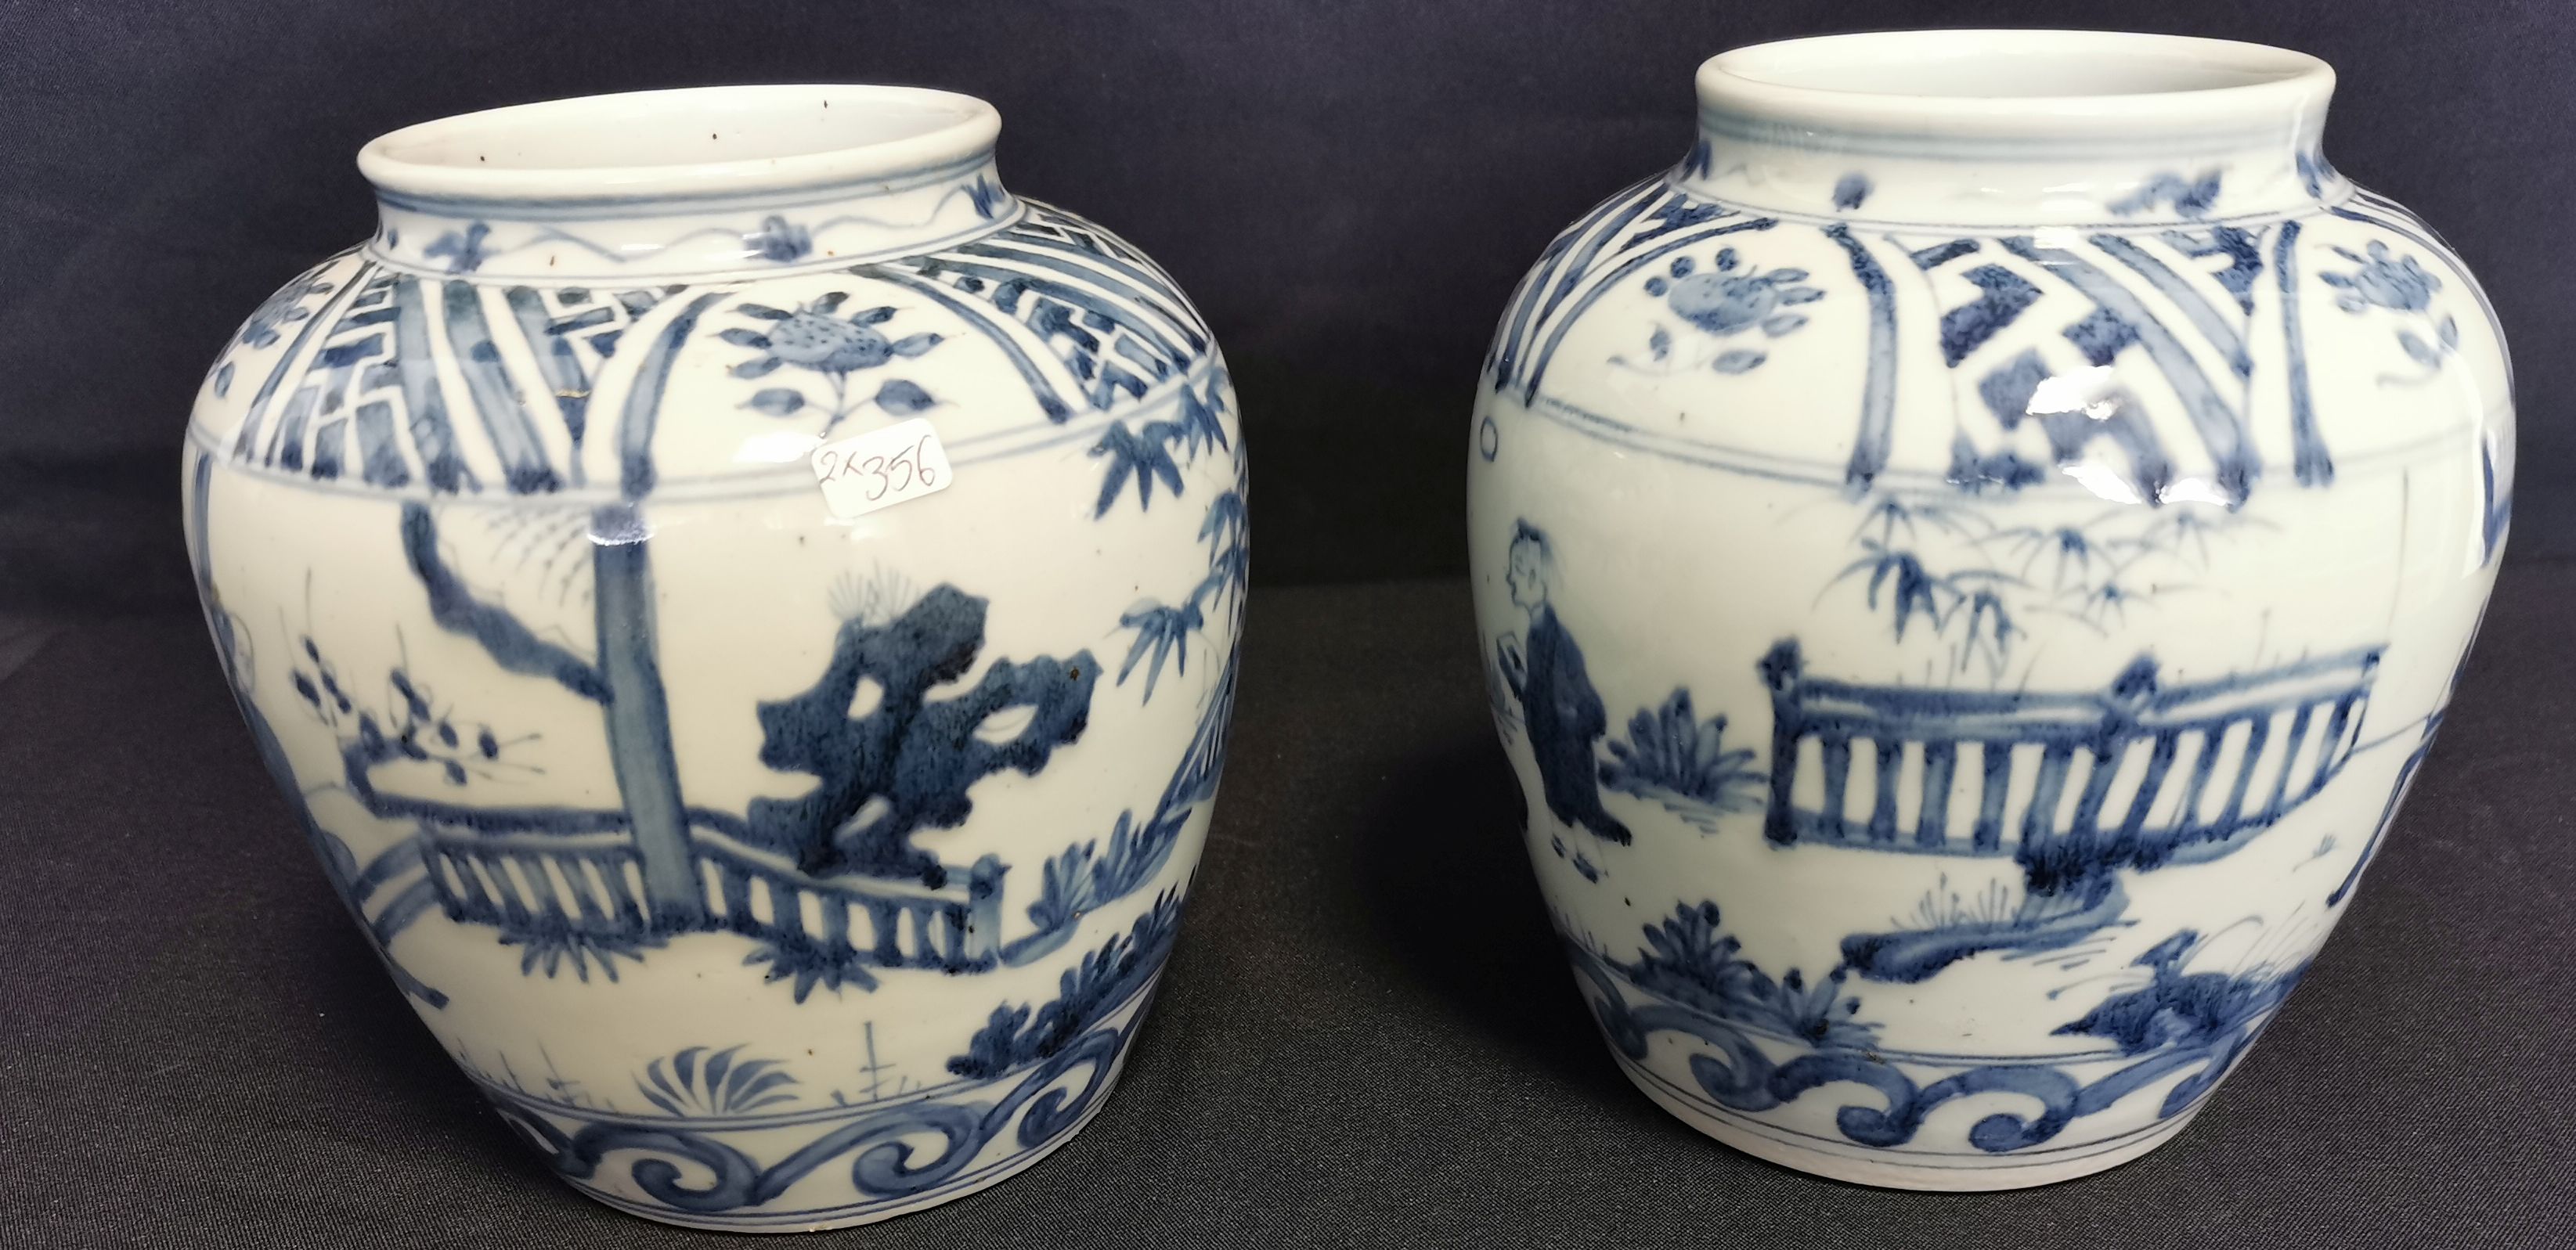 VASES WITH BLUE PAINTING - Image 4 of 6